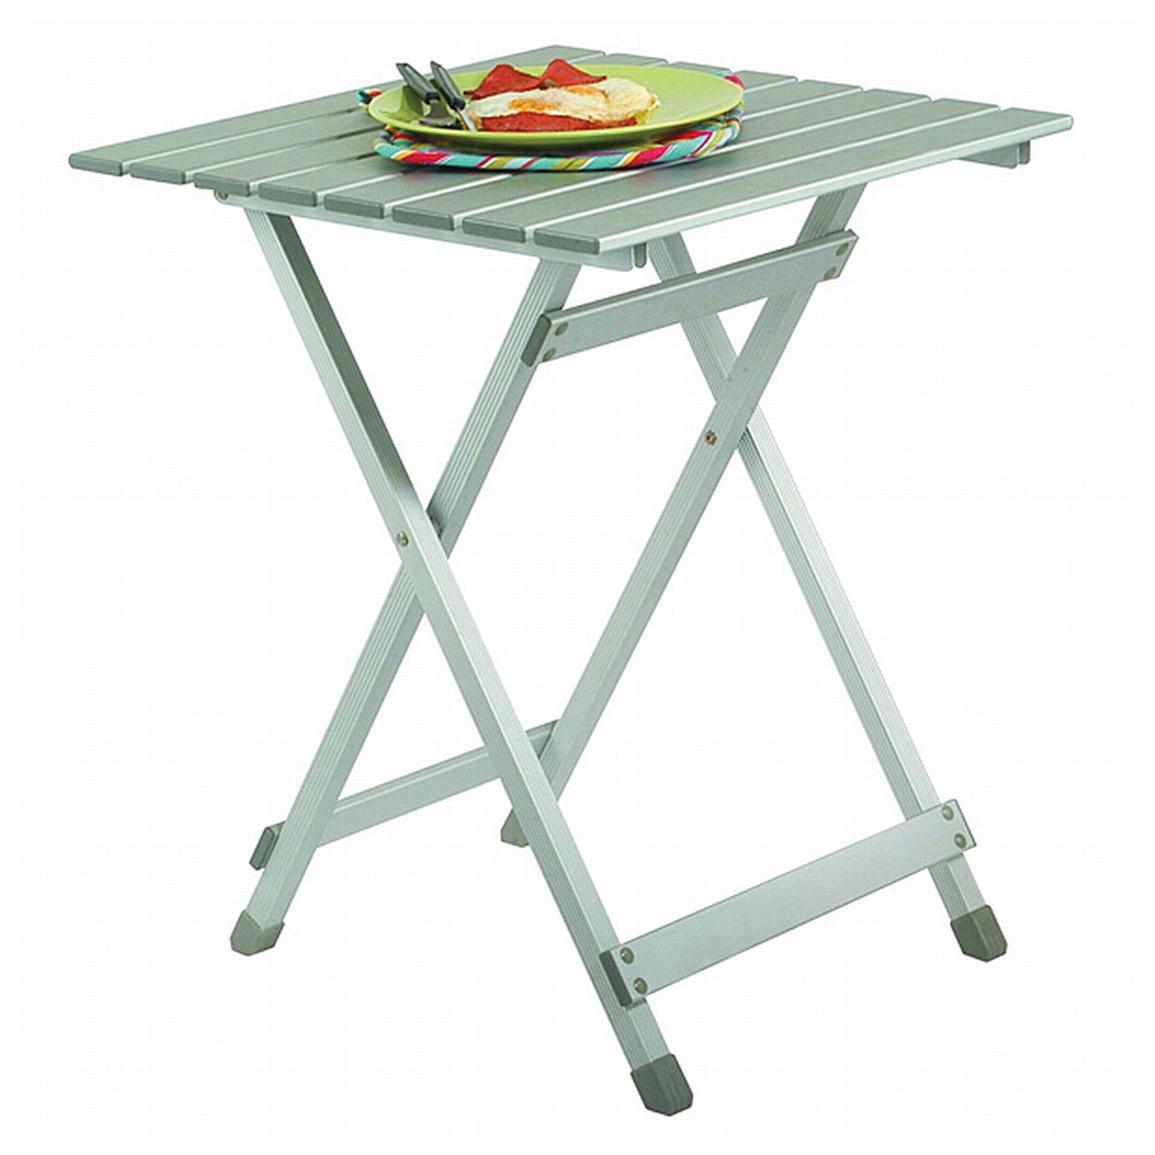 Small Easy Fold Square Aluminum Table 425499 Tables At Sportsmans Guide